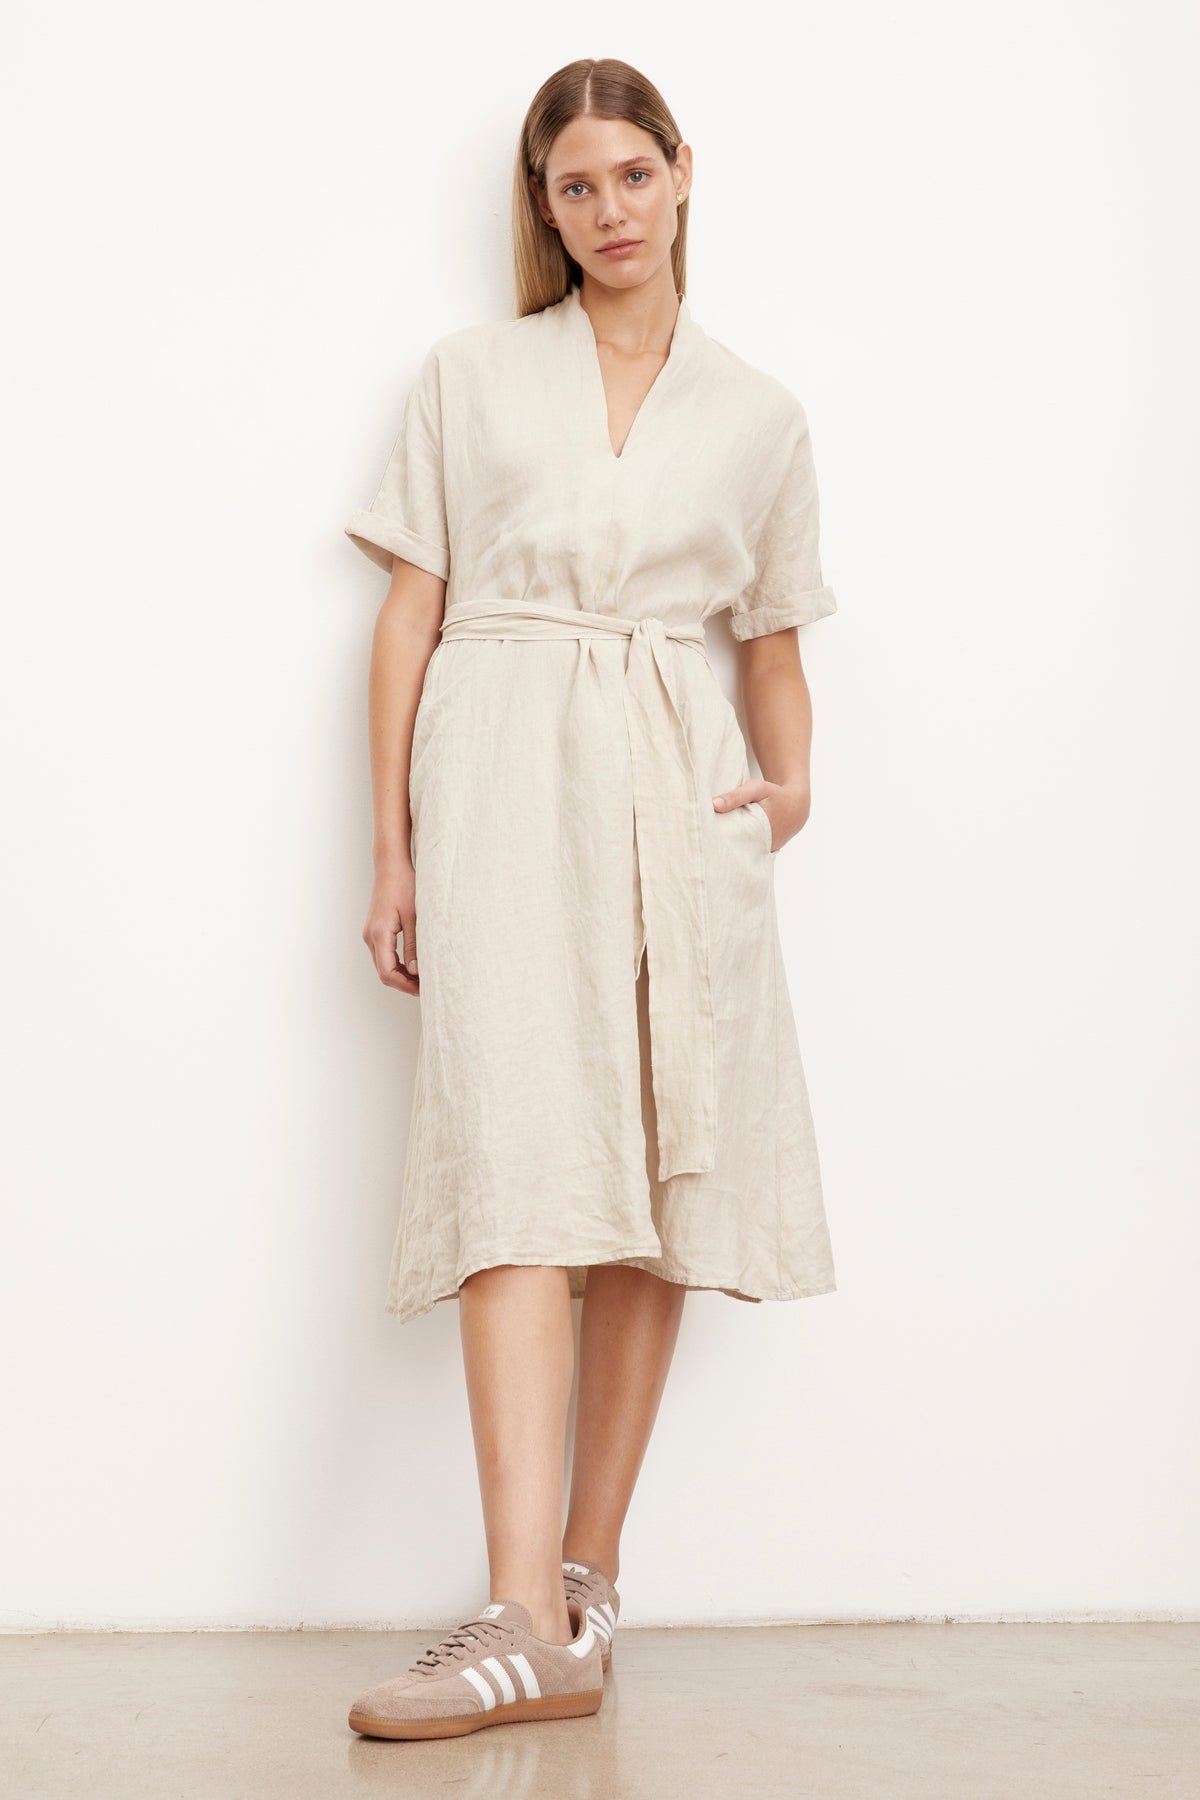 Woman leaning against wall wearing Winley Dress in sand colored linen belted with hand in pocket full length front-26426151993537